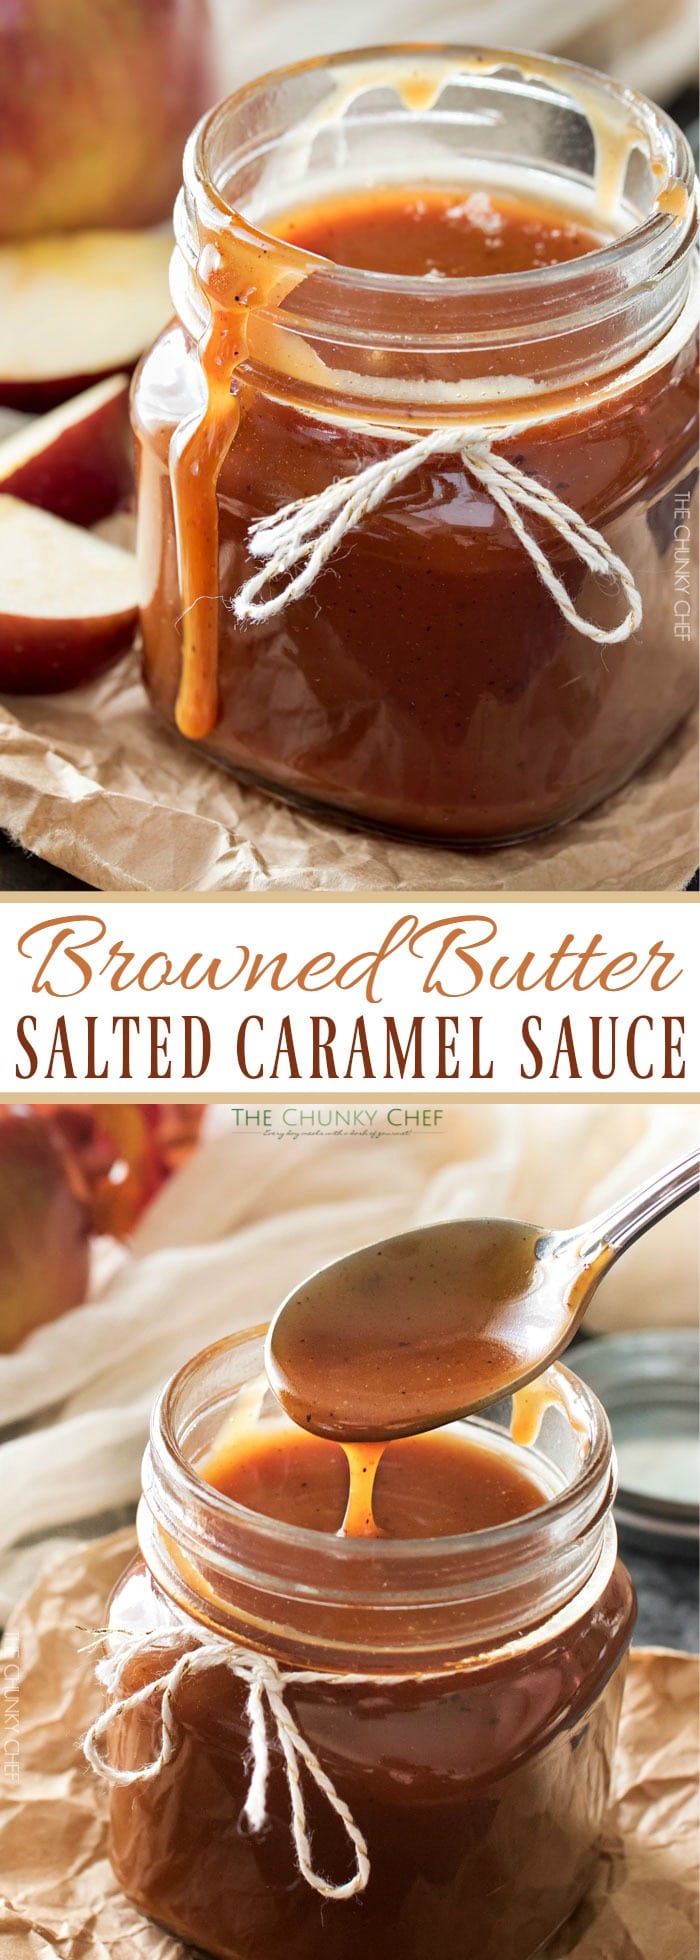 Browned Butter Salted Caramel Sauce | Browned butter gives this homemade salted caramel sauce a deliciously deep flavor! | http://thechunkychef.com